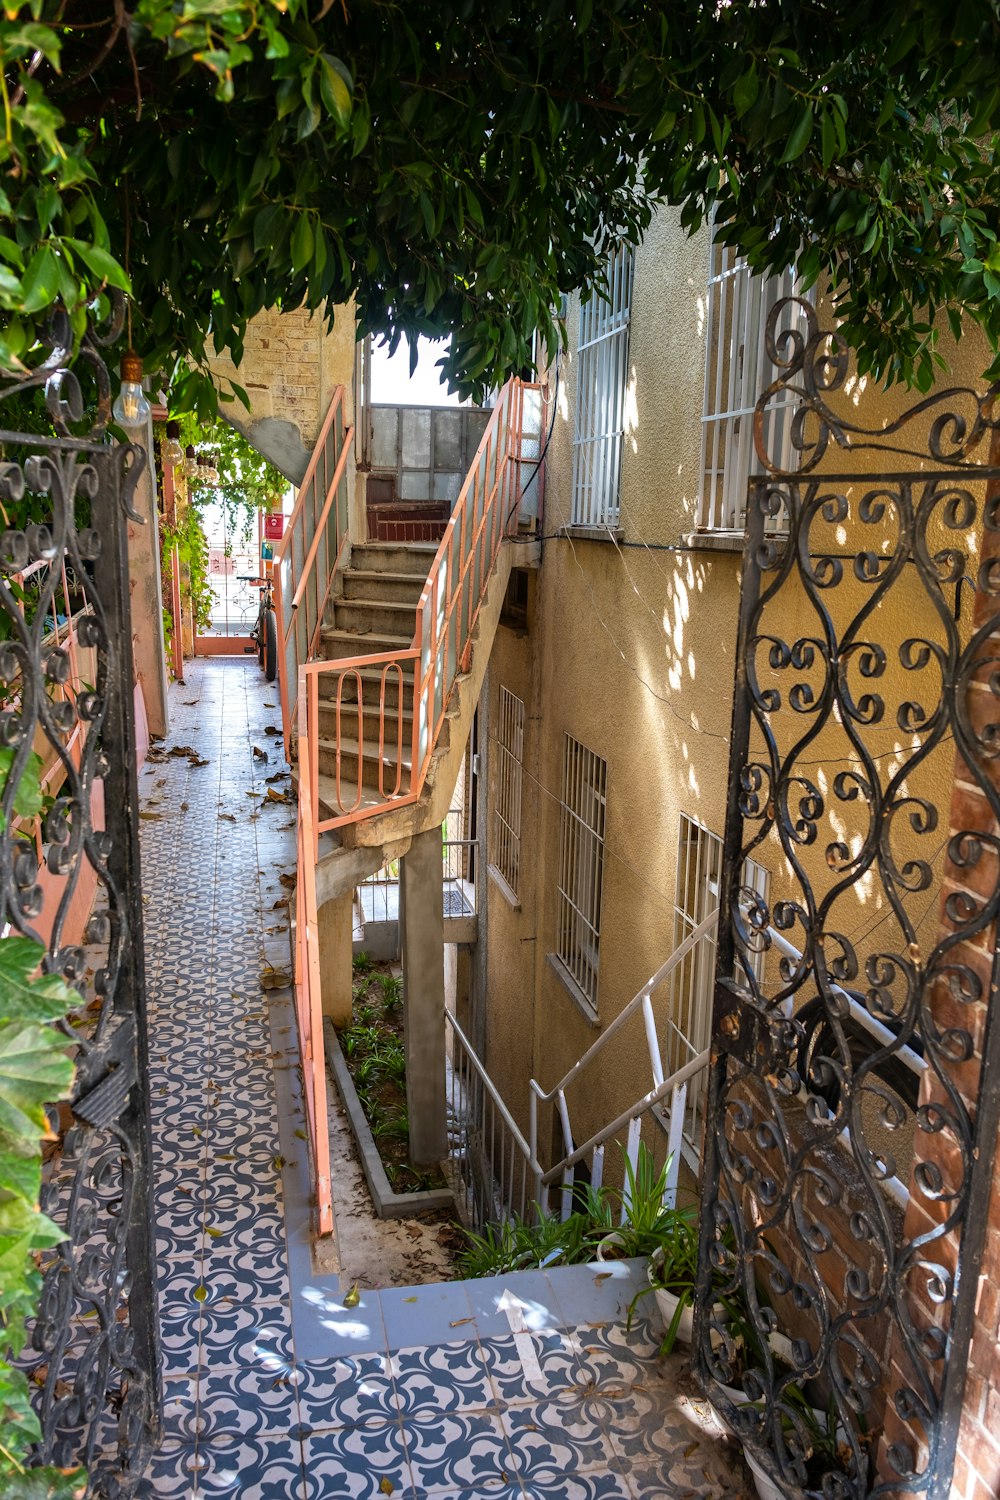 an alleyway with stairs and a tiled floor